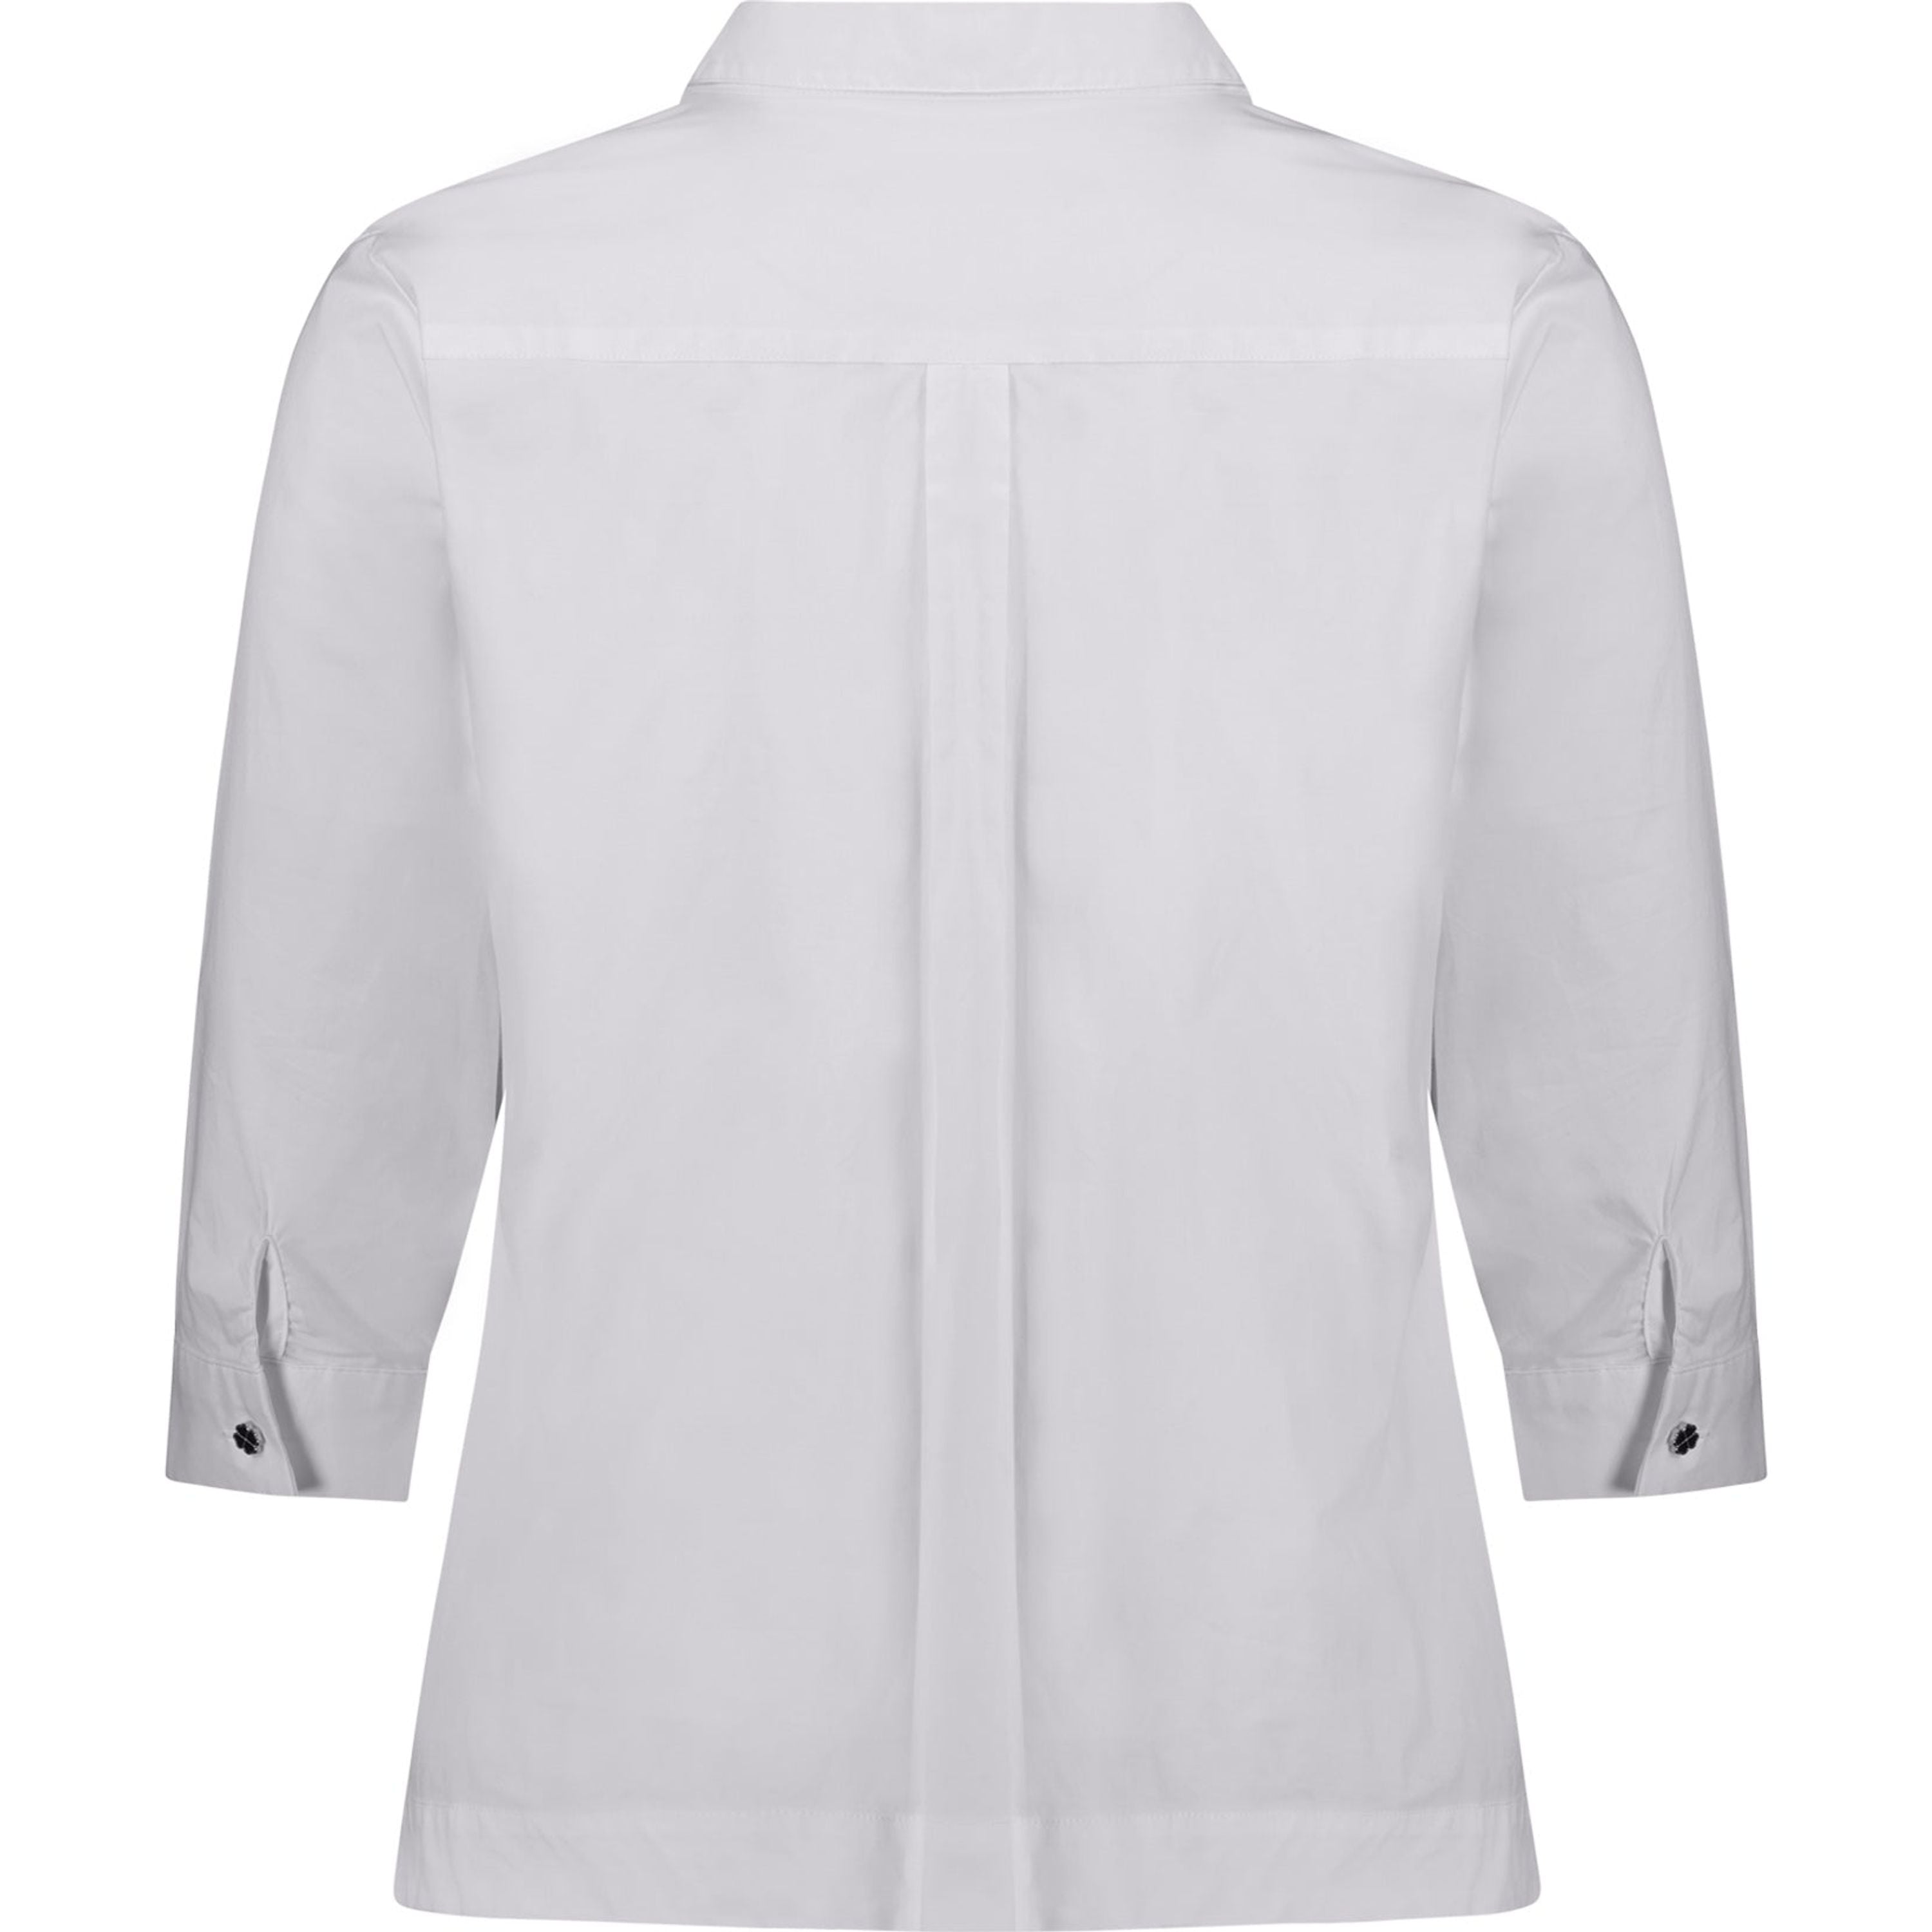 Elbow Length Sleeve Shirt with Fancy Buttons